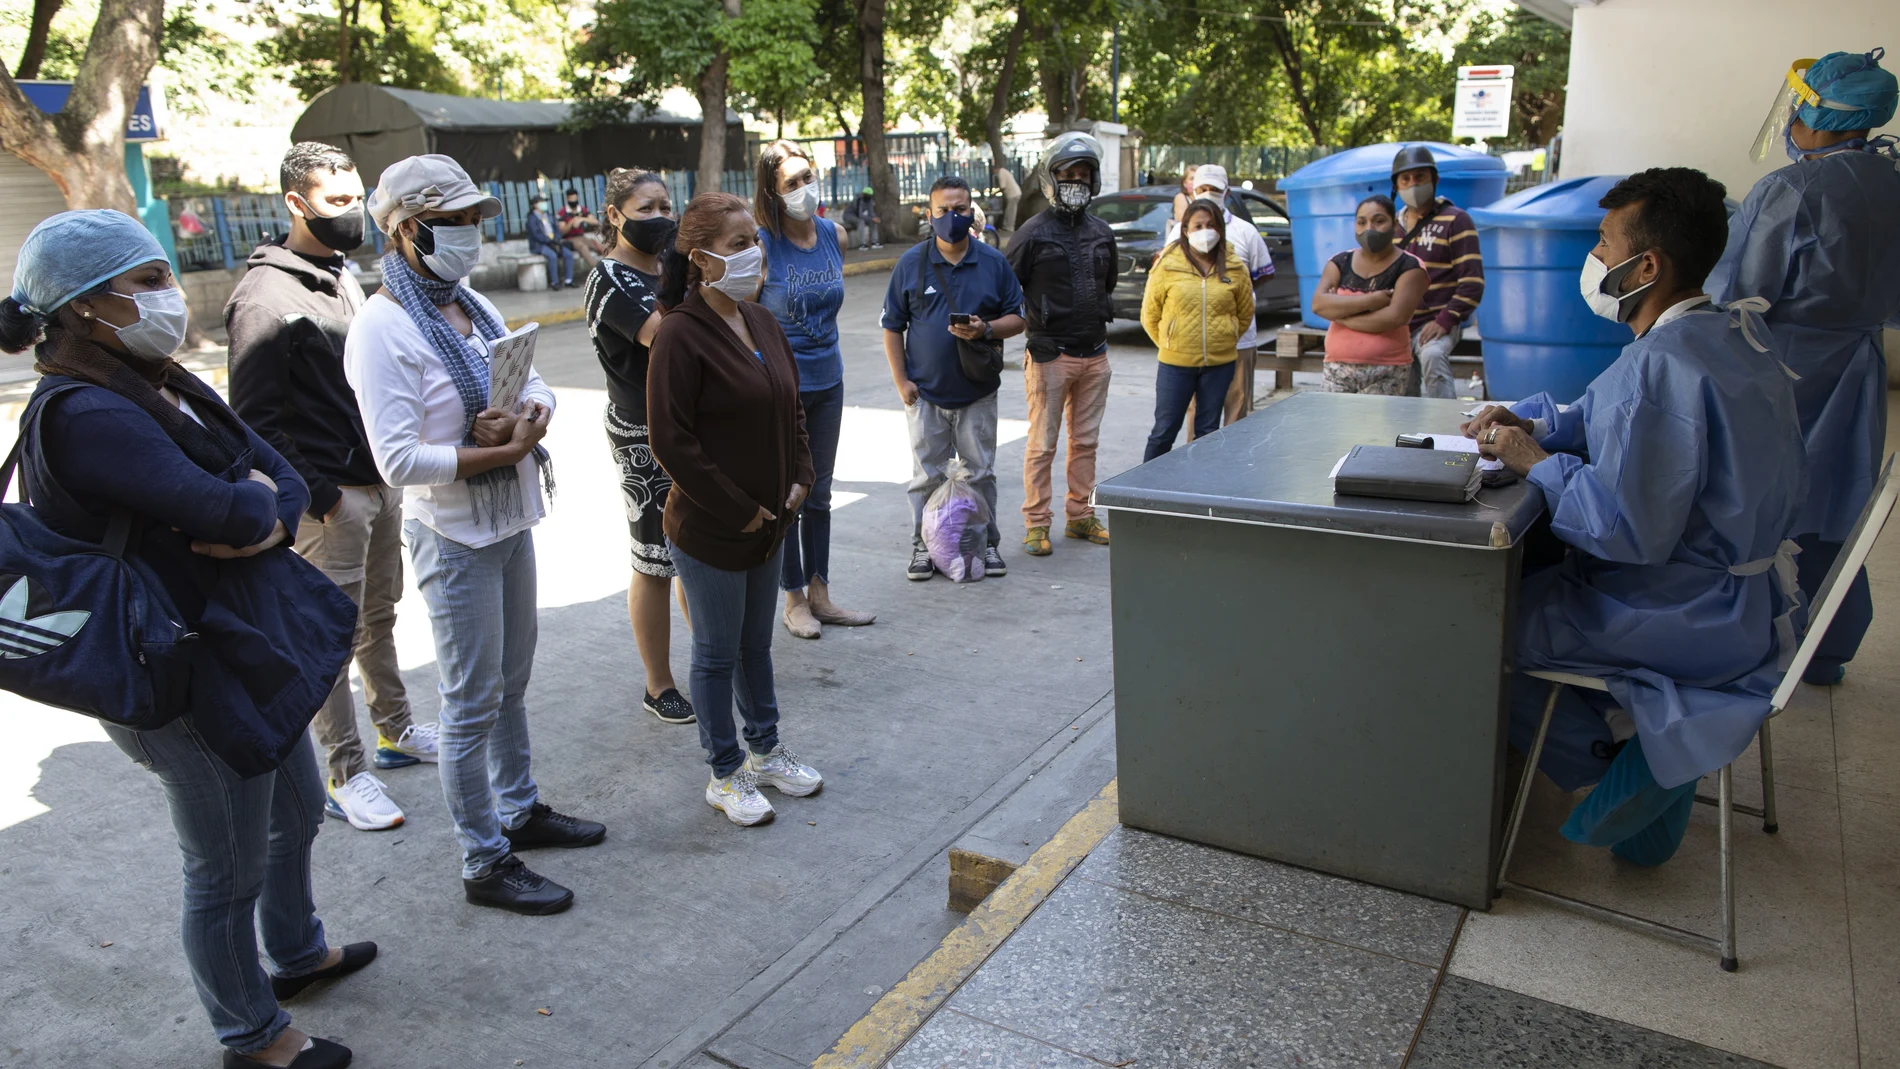 Dr. Wilfredo Sifontes, right, speaks to families who have family hospitalized in the COVID-19 wing, outside JosÃ© Gregorio HernÃ¡ndez Hospital in the Catia neighborhood of Caracas, Venezuela, Friday, Sept 4, 2020. Sifontes, who oversees the hospitalâ€™s emergency services including its coronavirus wing, described having a fever, cough and feeling sick. Though he oversees testing kits, he himself was never tested and continued to clock in. He dismissed the threat of the coronavirus, comparing it to a â€œcommon fluâ€ thatâ€™s sparked needless panic. (AP Photo/Ariana Cubillos)